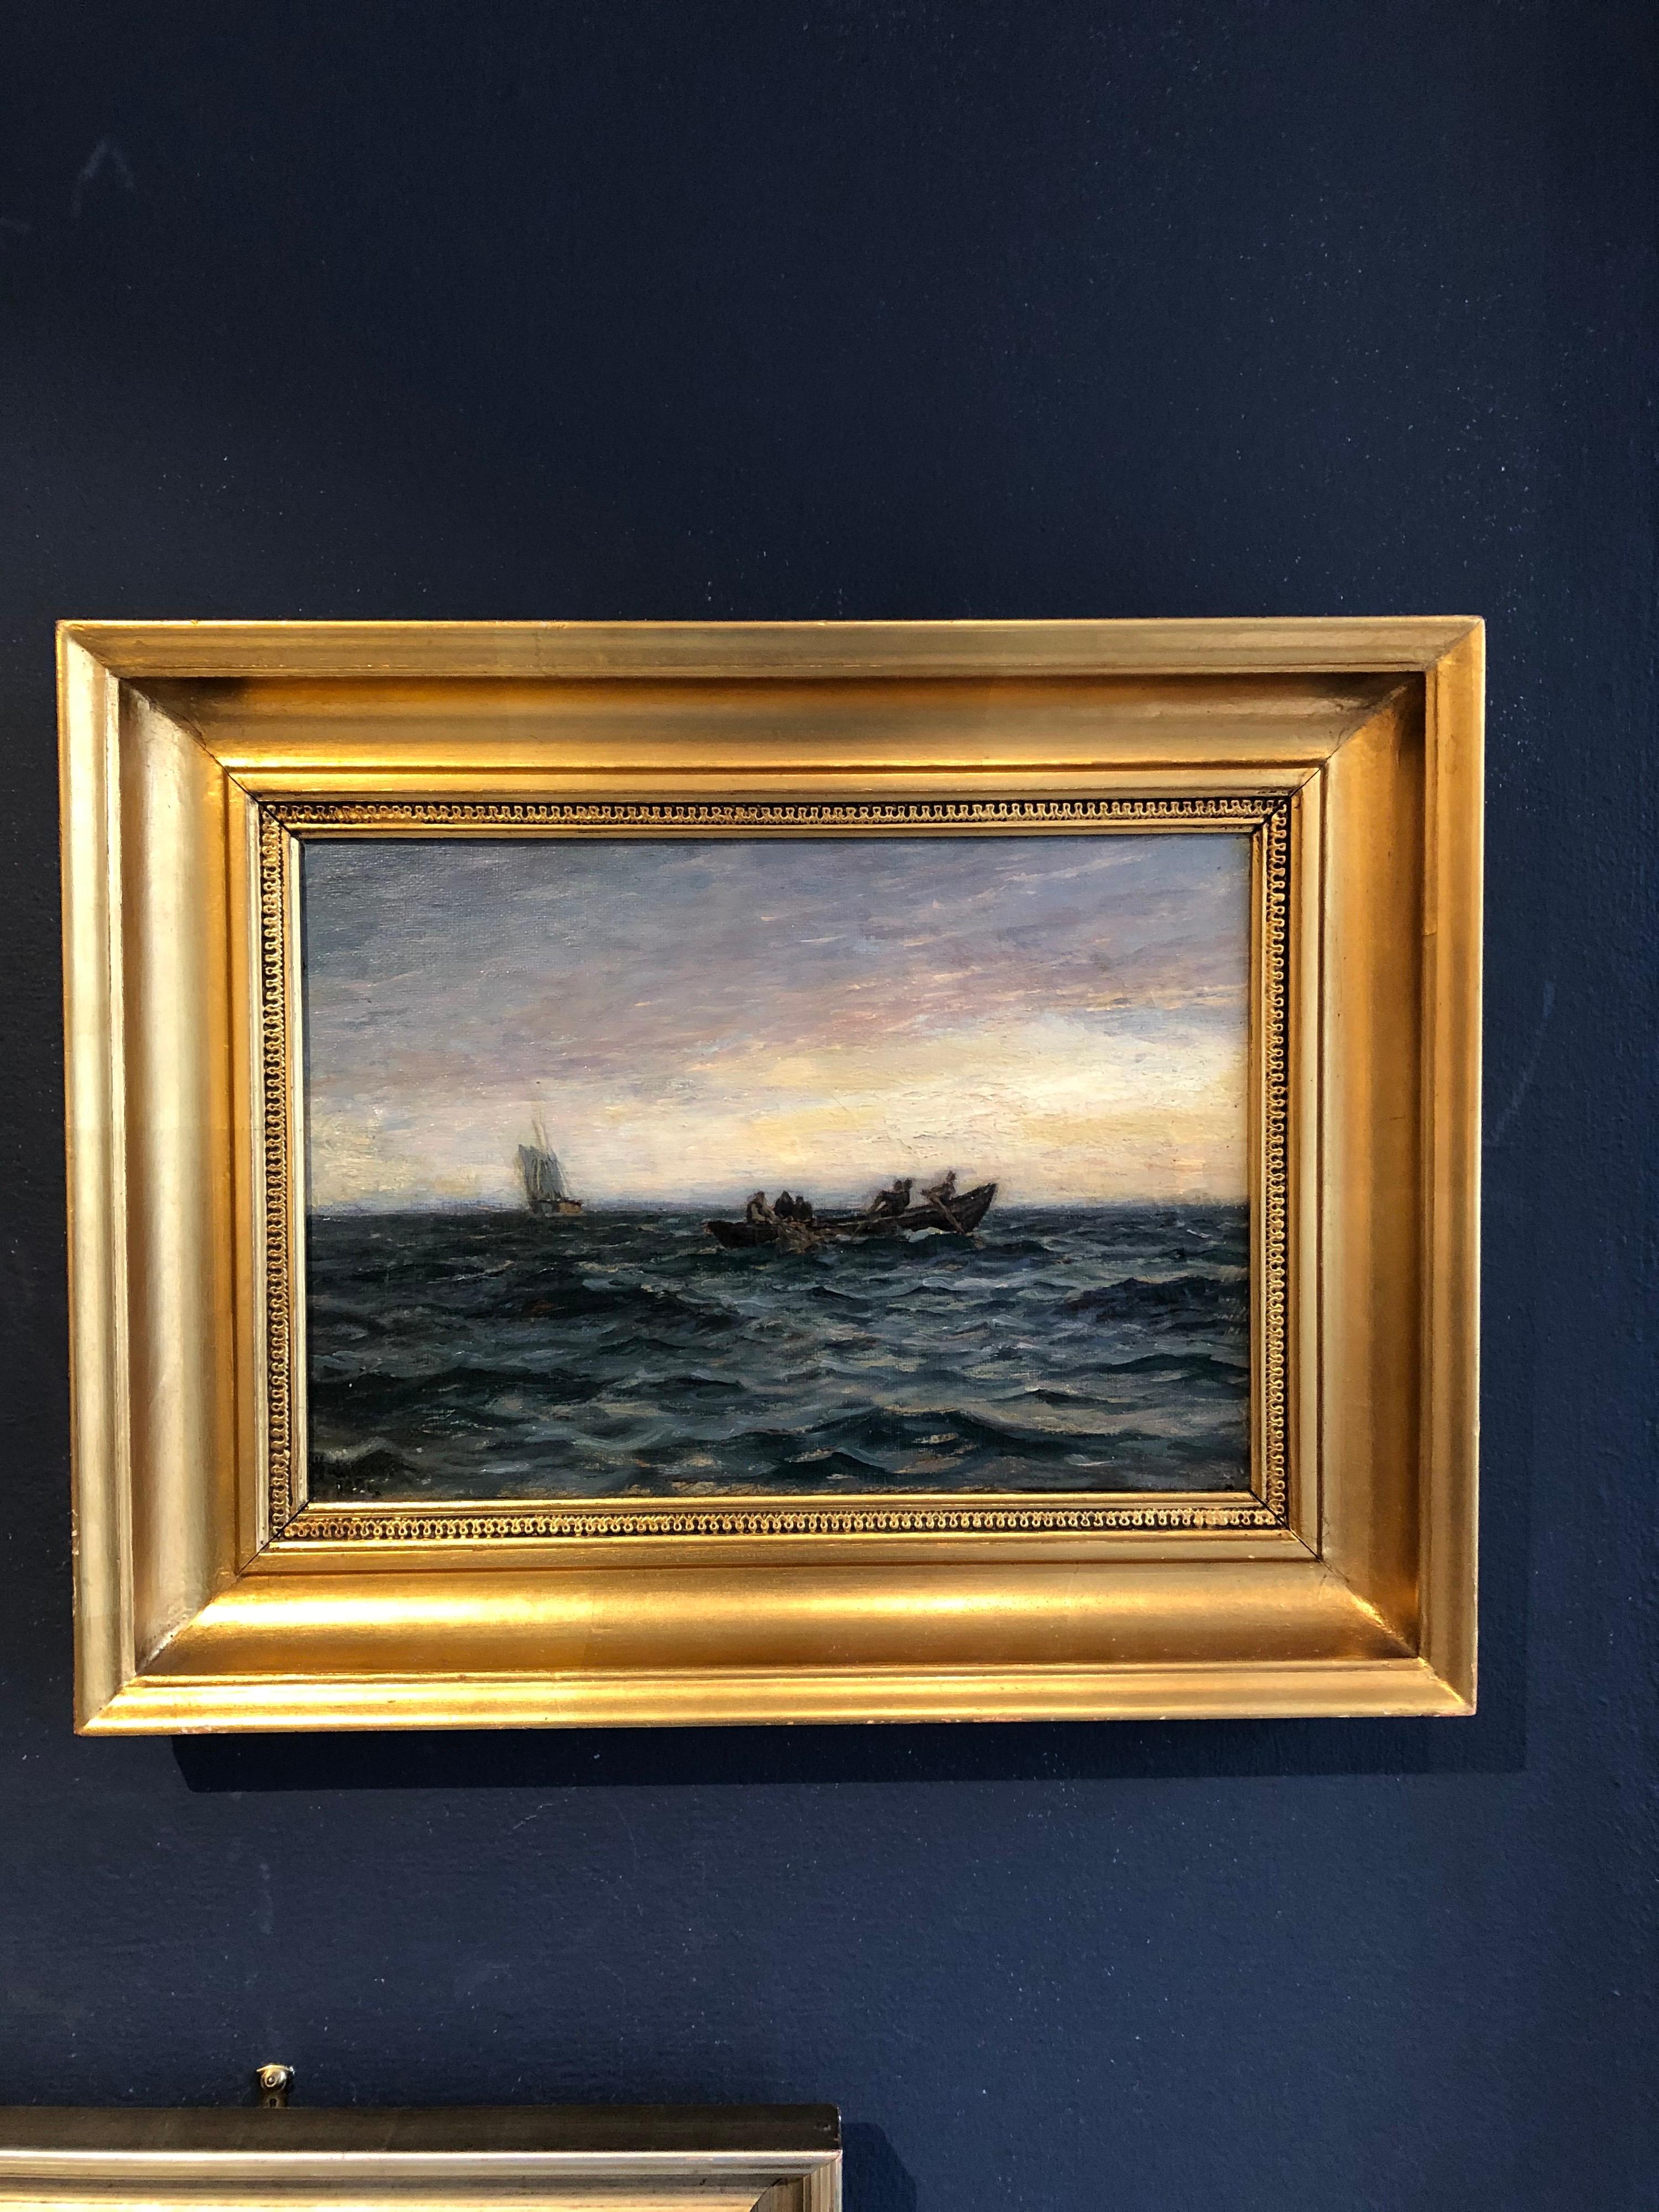 Fabulous petite seascape by well known Danish artist Holger Lubbers. Glorious blues make up the deep ocean waves against a pastel light filled sky. Signed H. Lubbers, 1891.